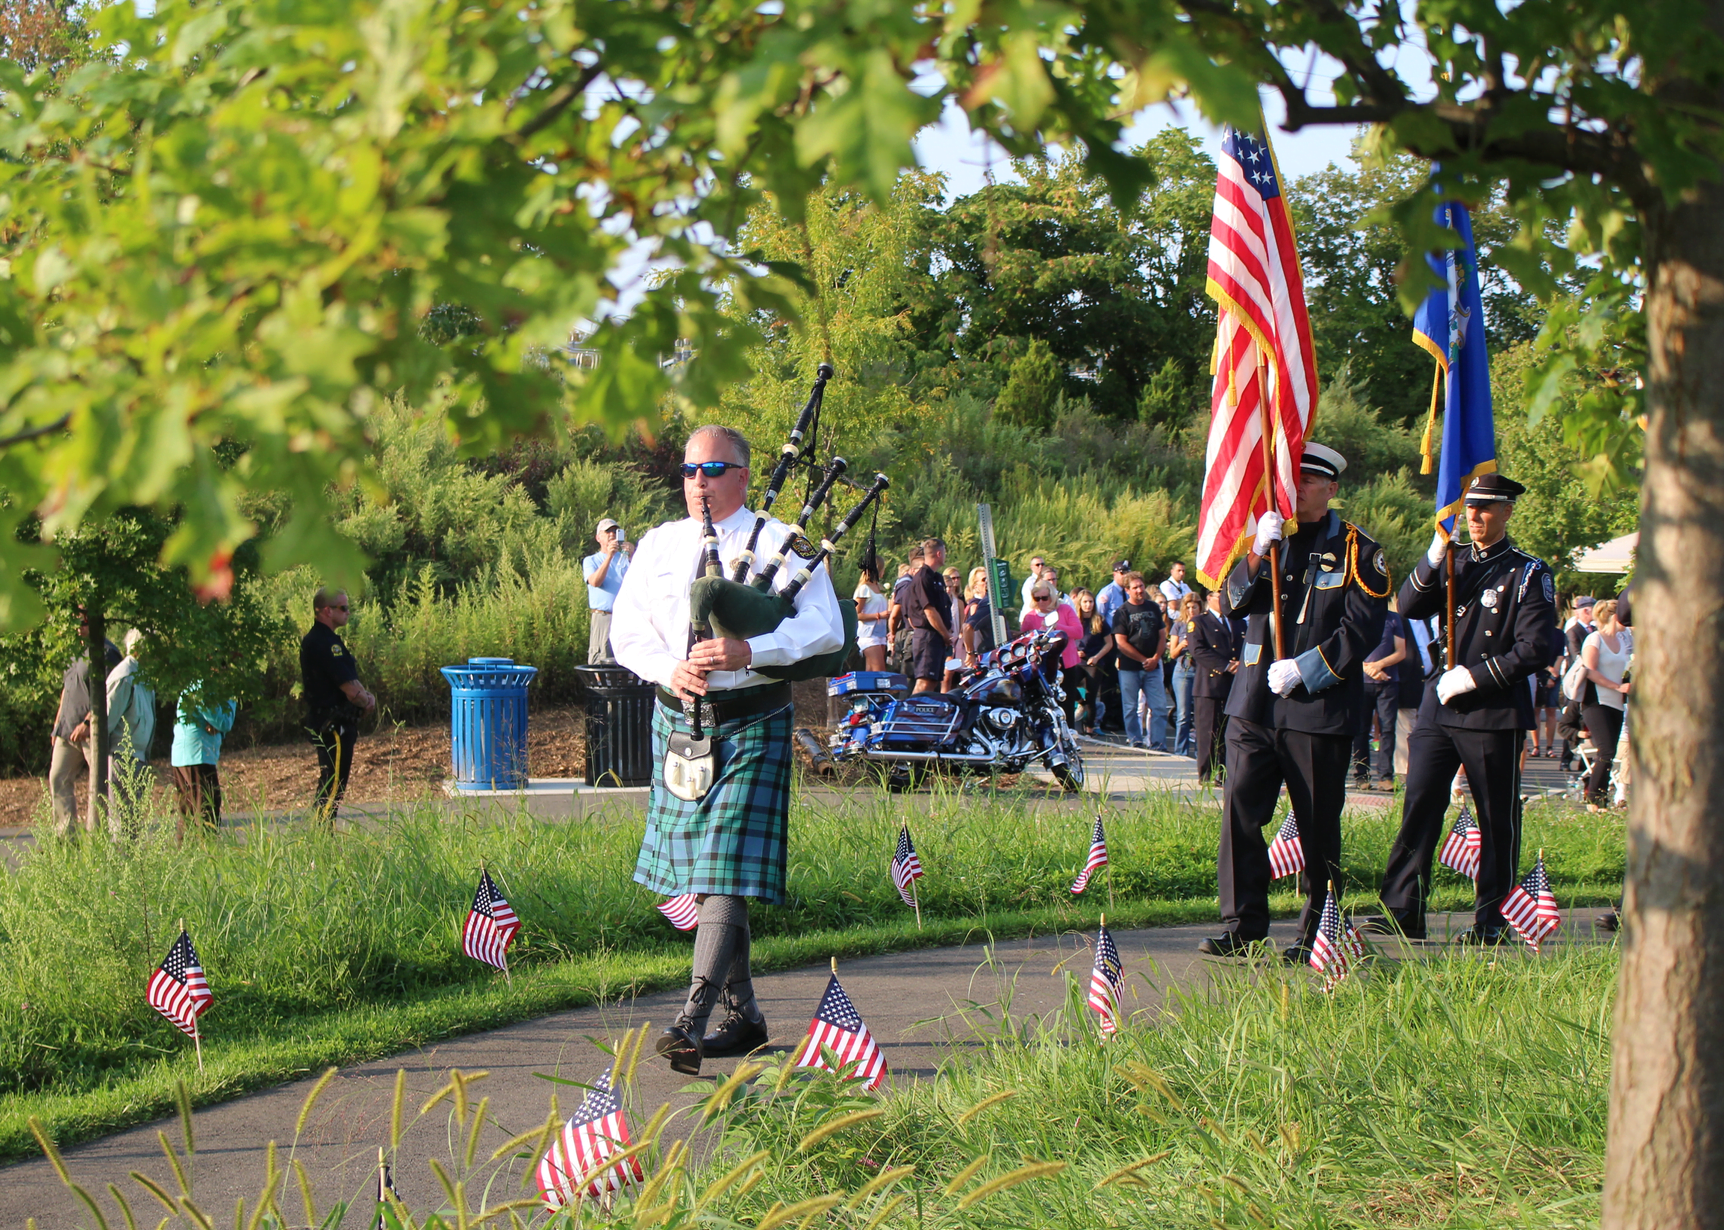 Lt James Bonney played the bagpipes as he led multiple honor guards to the September 11 memorial in Cos Cob Park. Sept 11, 2017 Photo:Leslie Yager